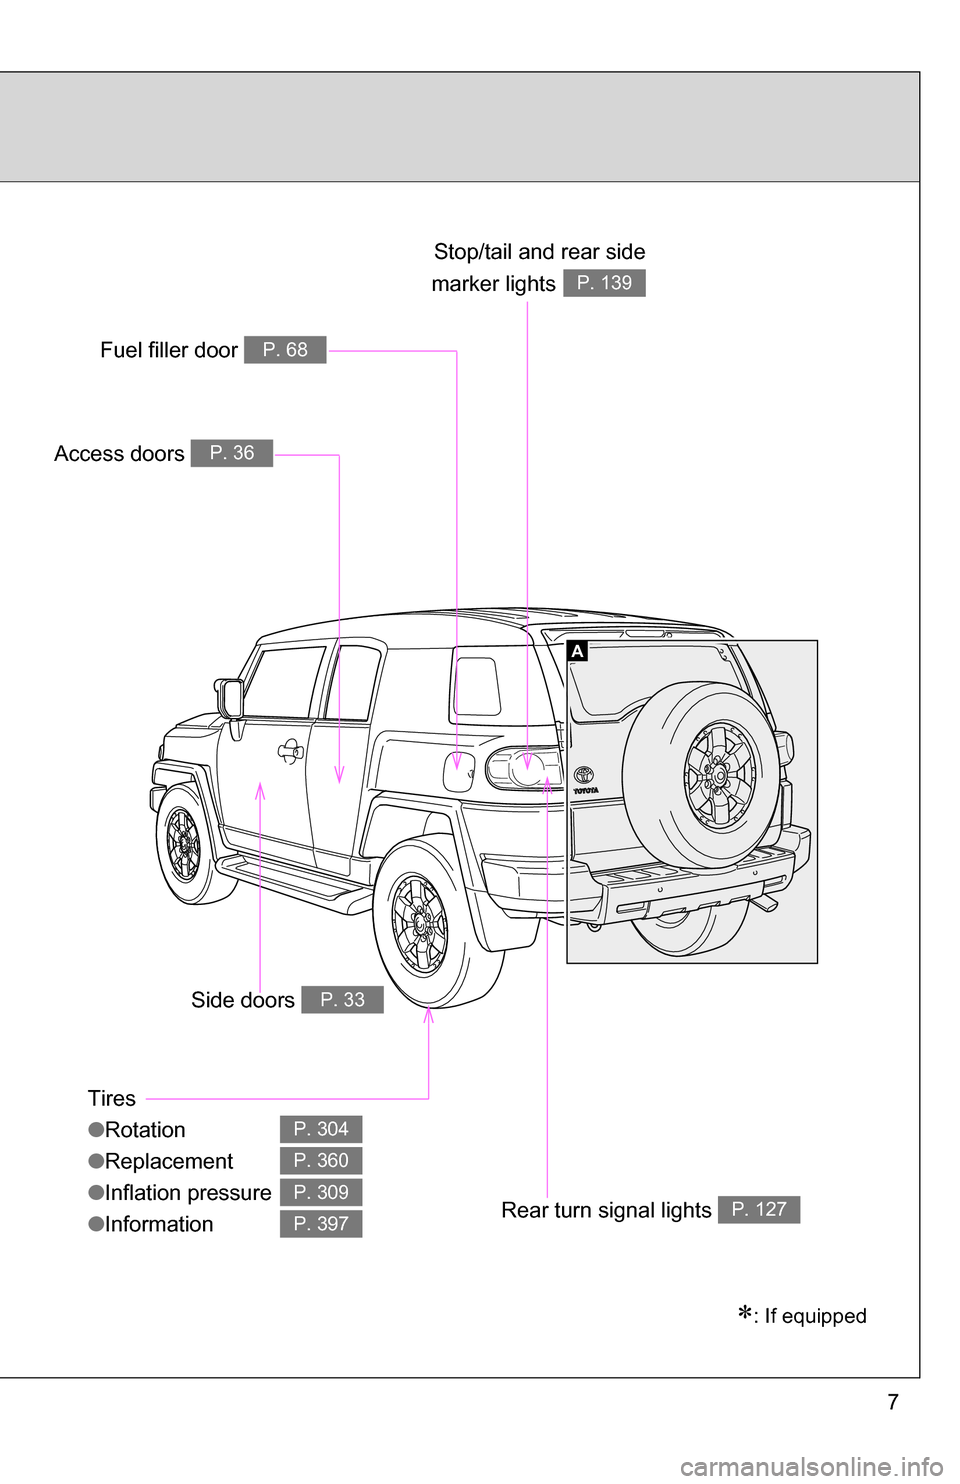 TOYOTA FJ CRUISER 2009 1.G Owners Manual 7
A
Tires
●Rotation
● Replacement
● Inflation pressure
● Information
P. 304
P. 360
P. 309
P. 397
Access doors P. 36
Fuel filler door P. 68
Rear turn signal lights P. 127
Stop/tail and rear sid